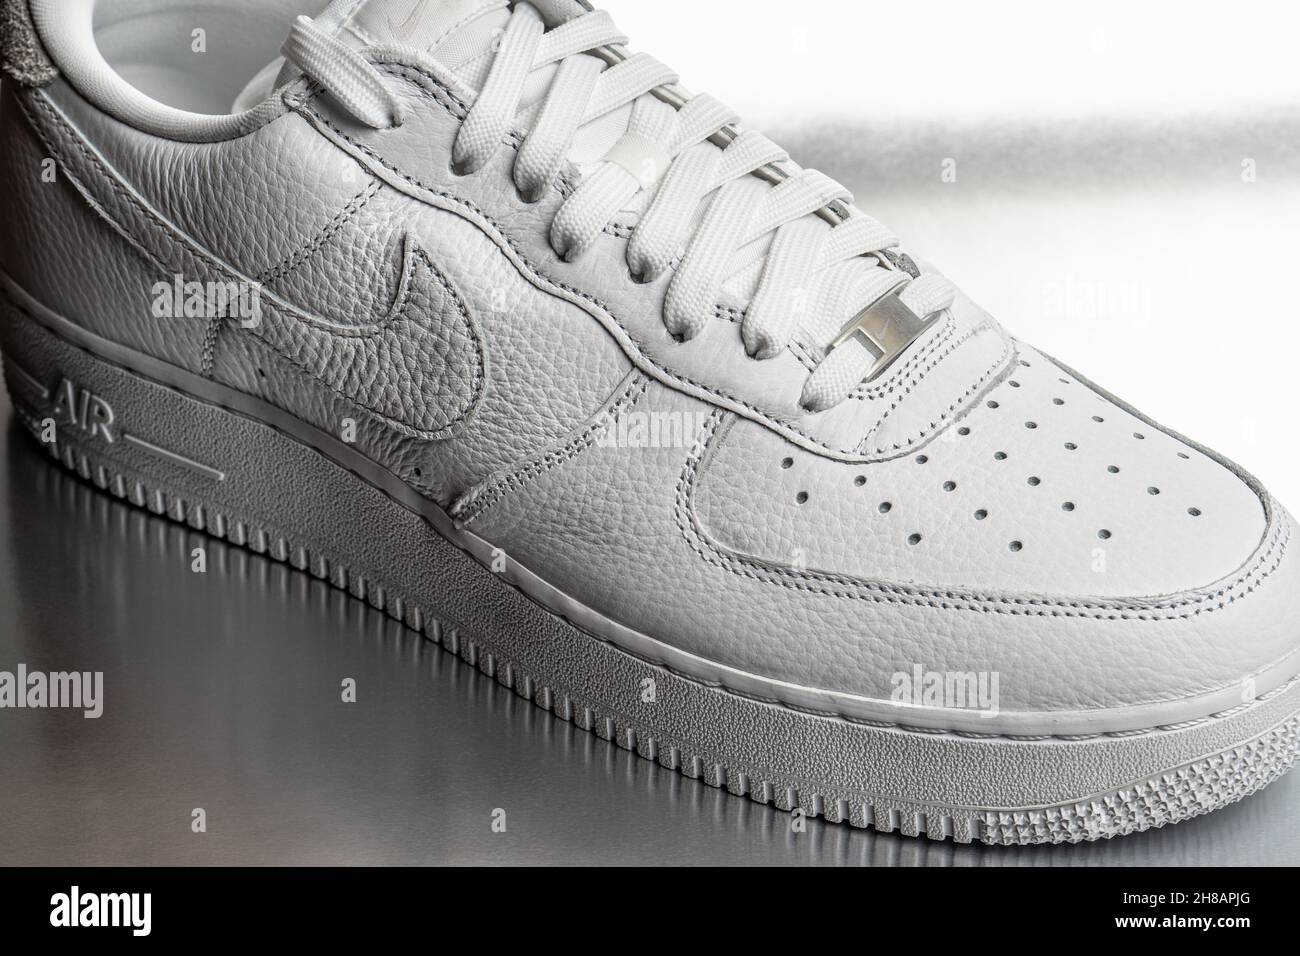 Moscow, Russia - November 2021: Nike Air Force 1 - white low classic basketball retro sneakers with Nike Air technology consists of pressurized air inside. Stock Photo